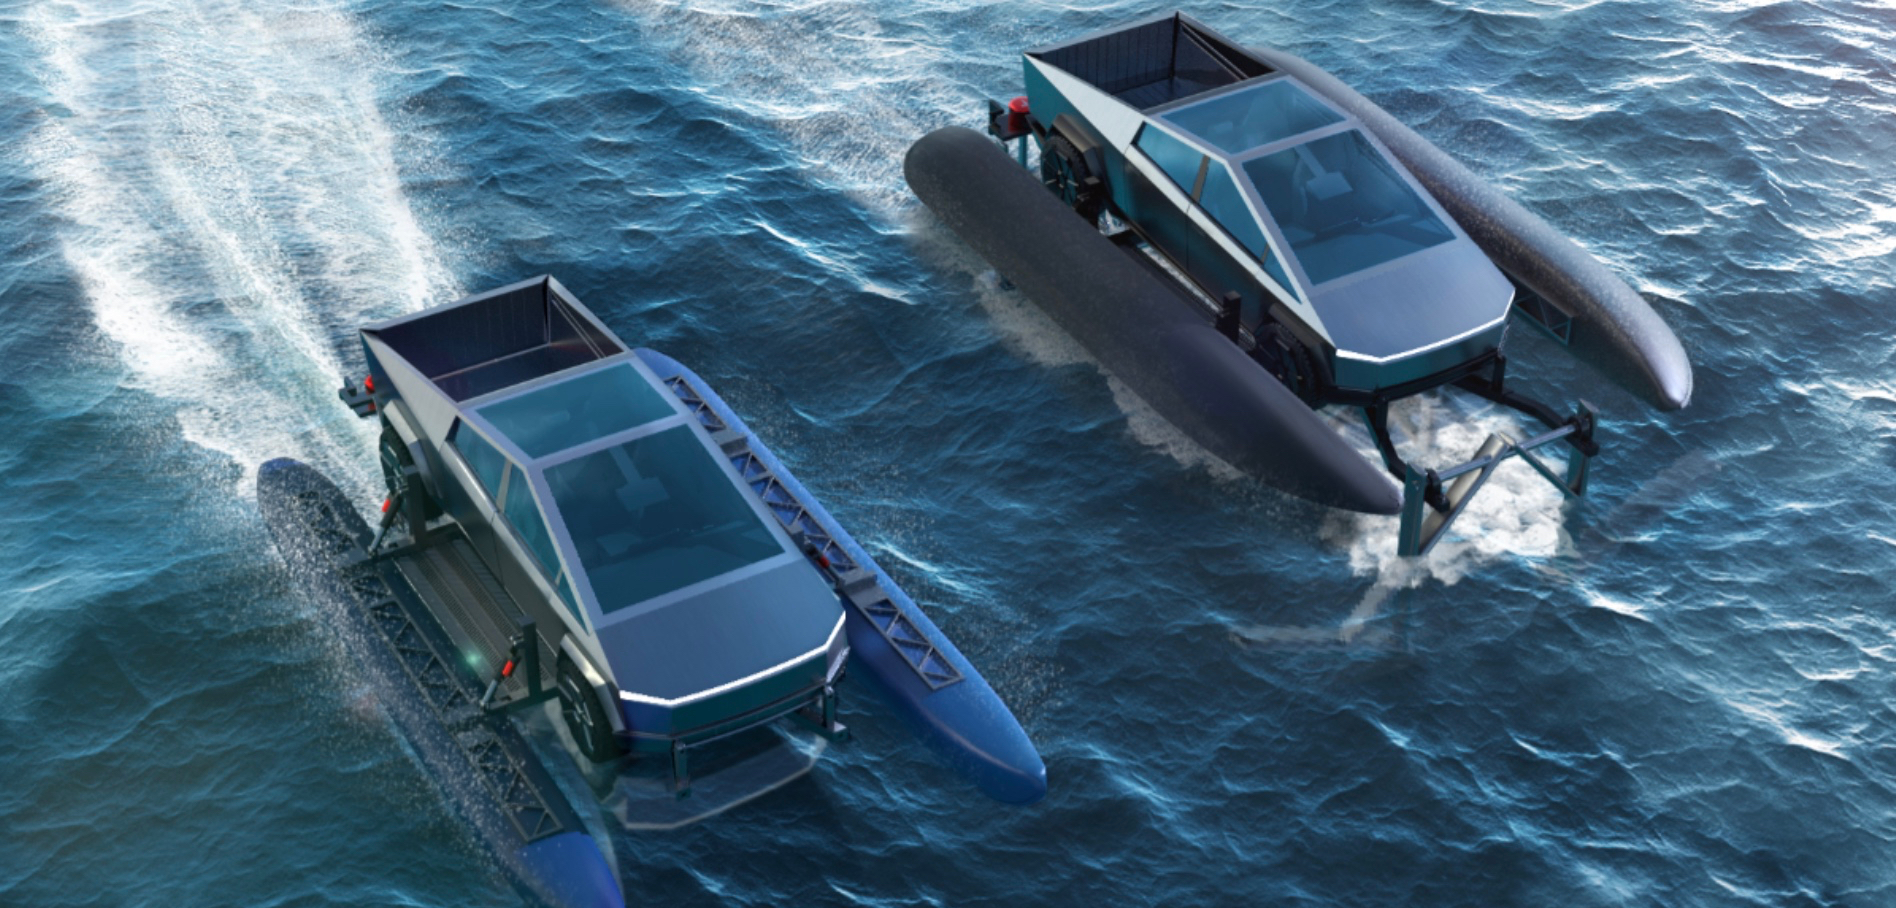 Will Tesla Cybertruck be able to operate on both land and water?